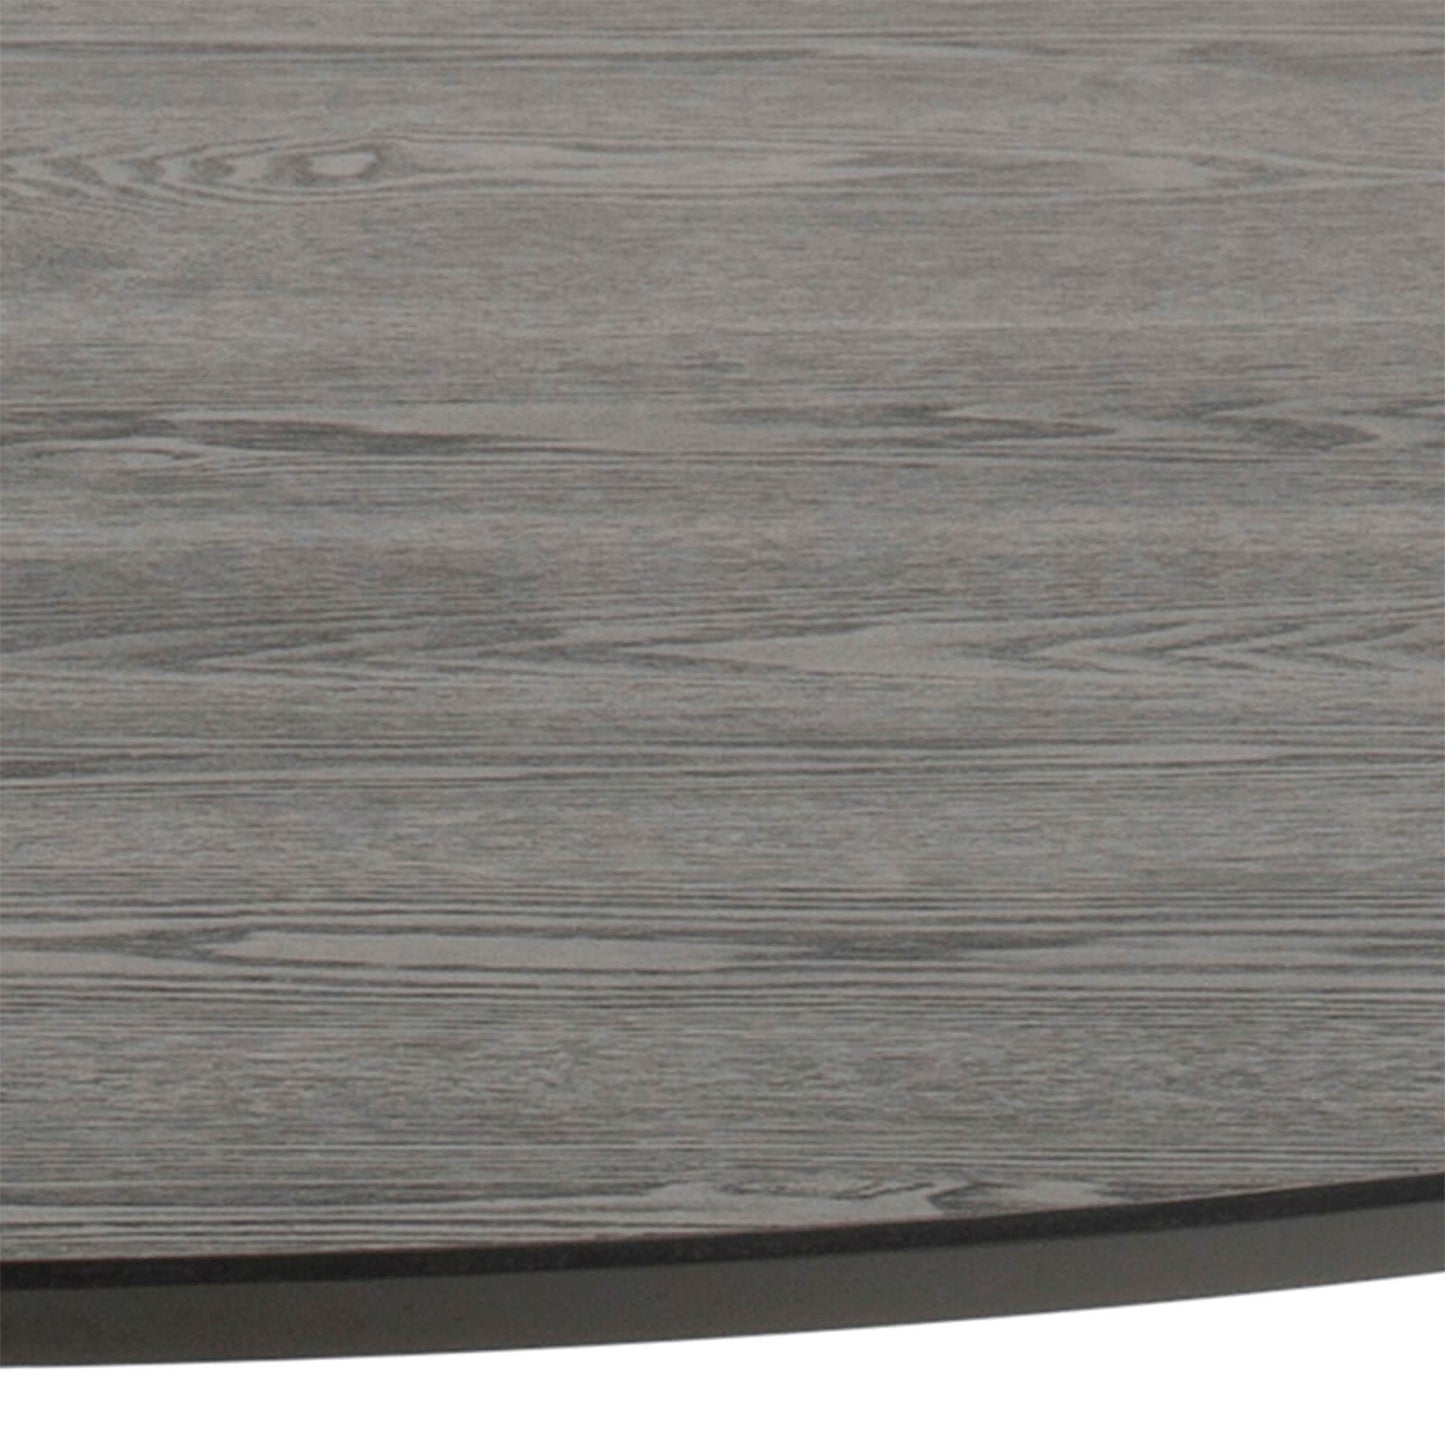 Lincoln | Metal Black White 1.1m Wooden Round Dining Table | Black